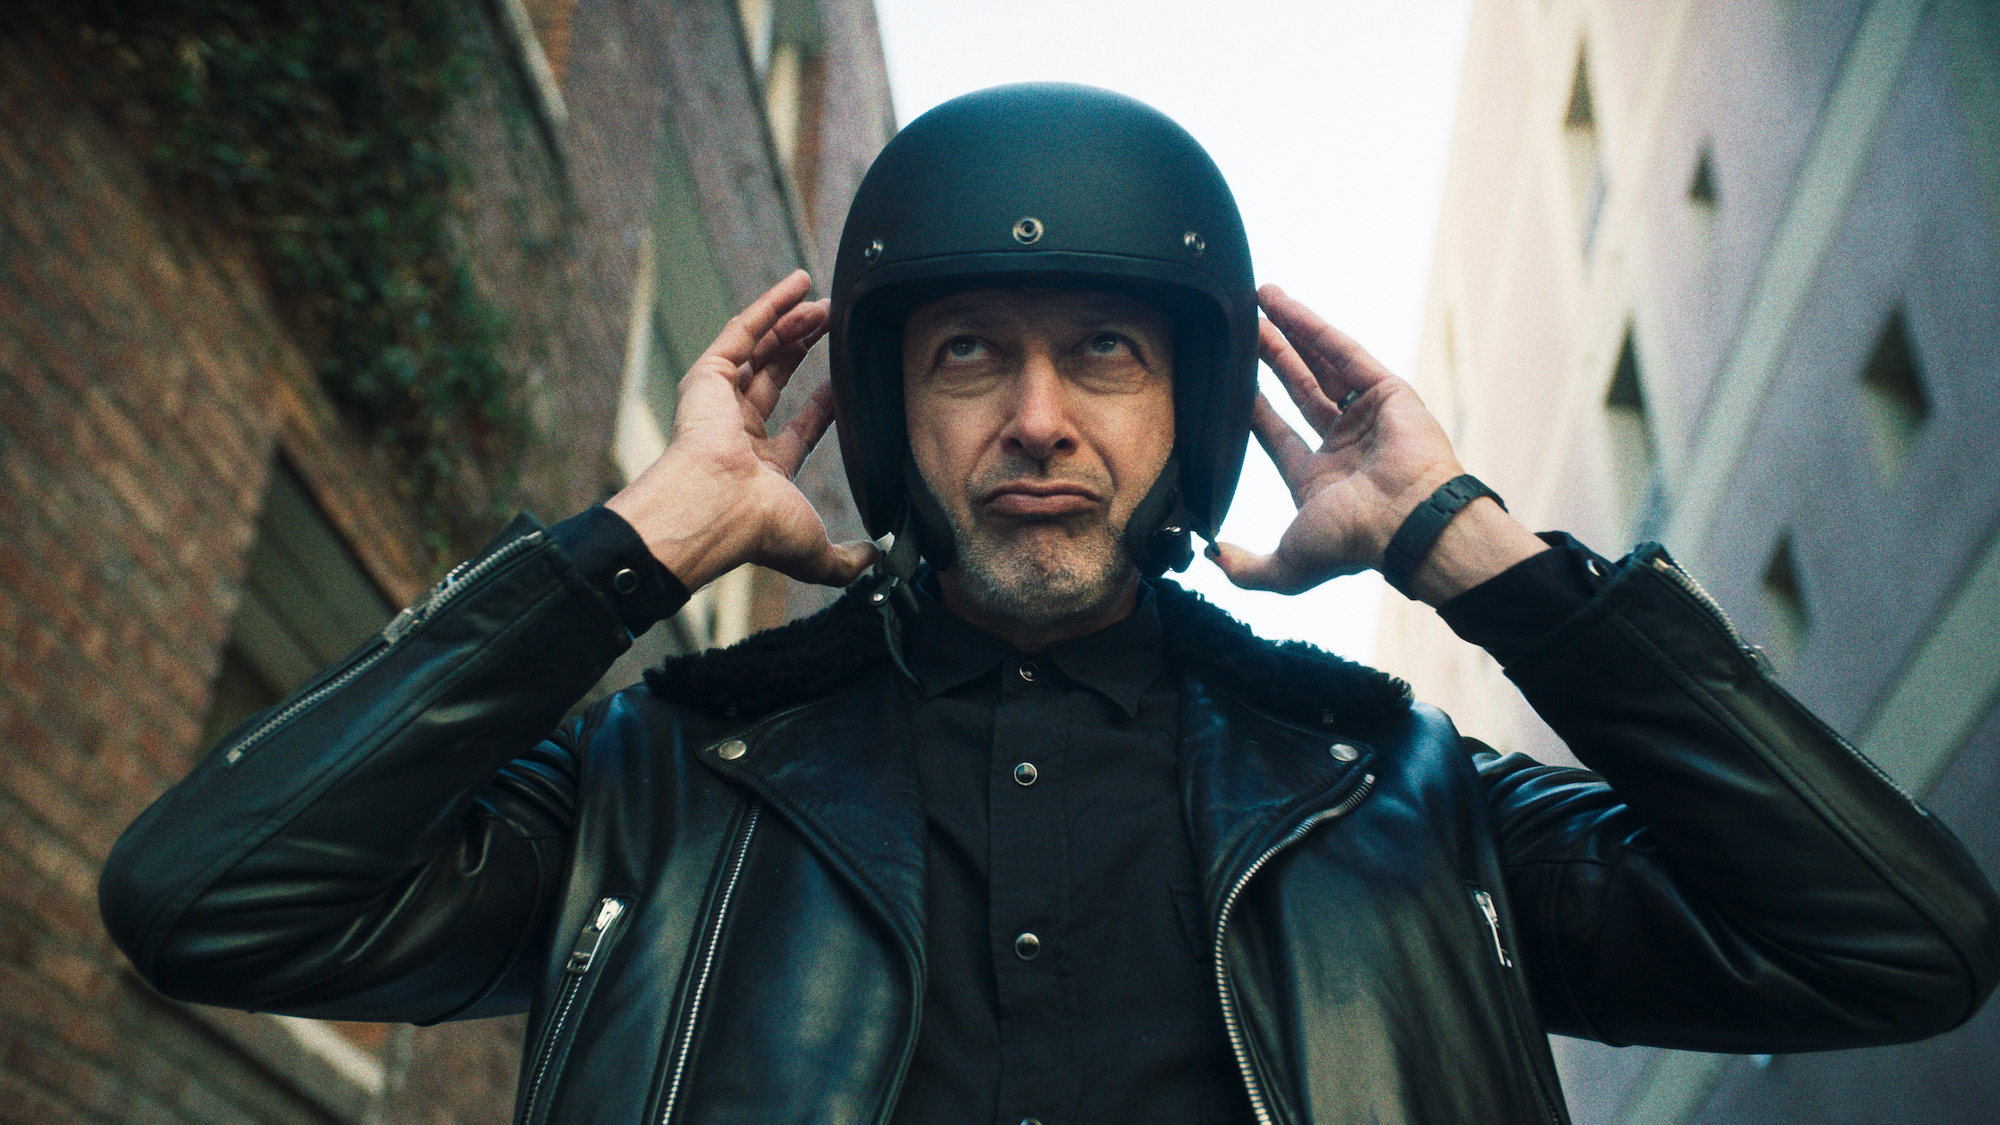 Jeff Goldblum on riding motorcycles—and feeling fear